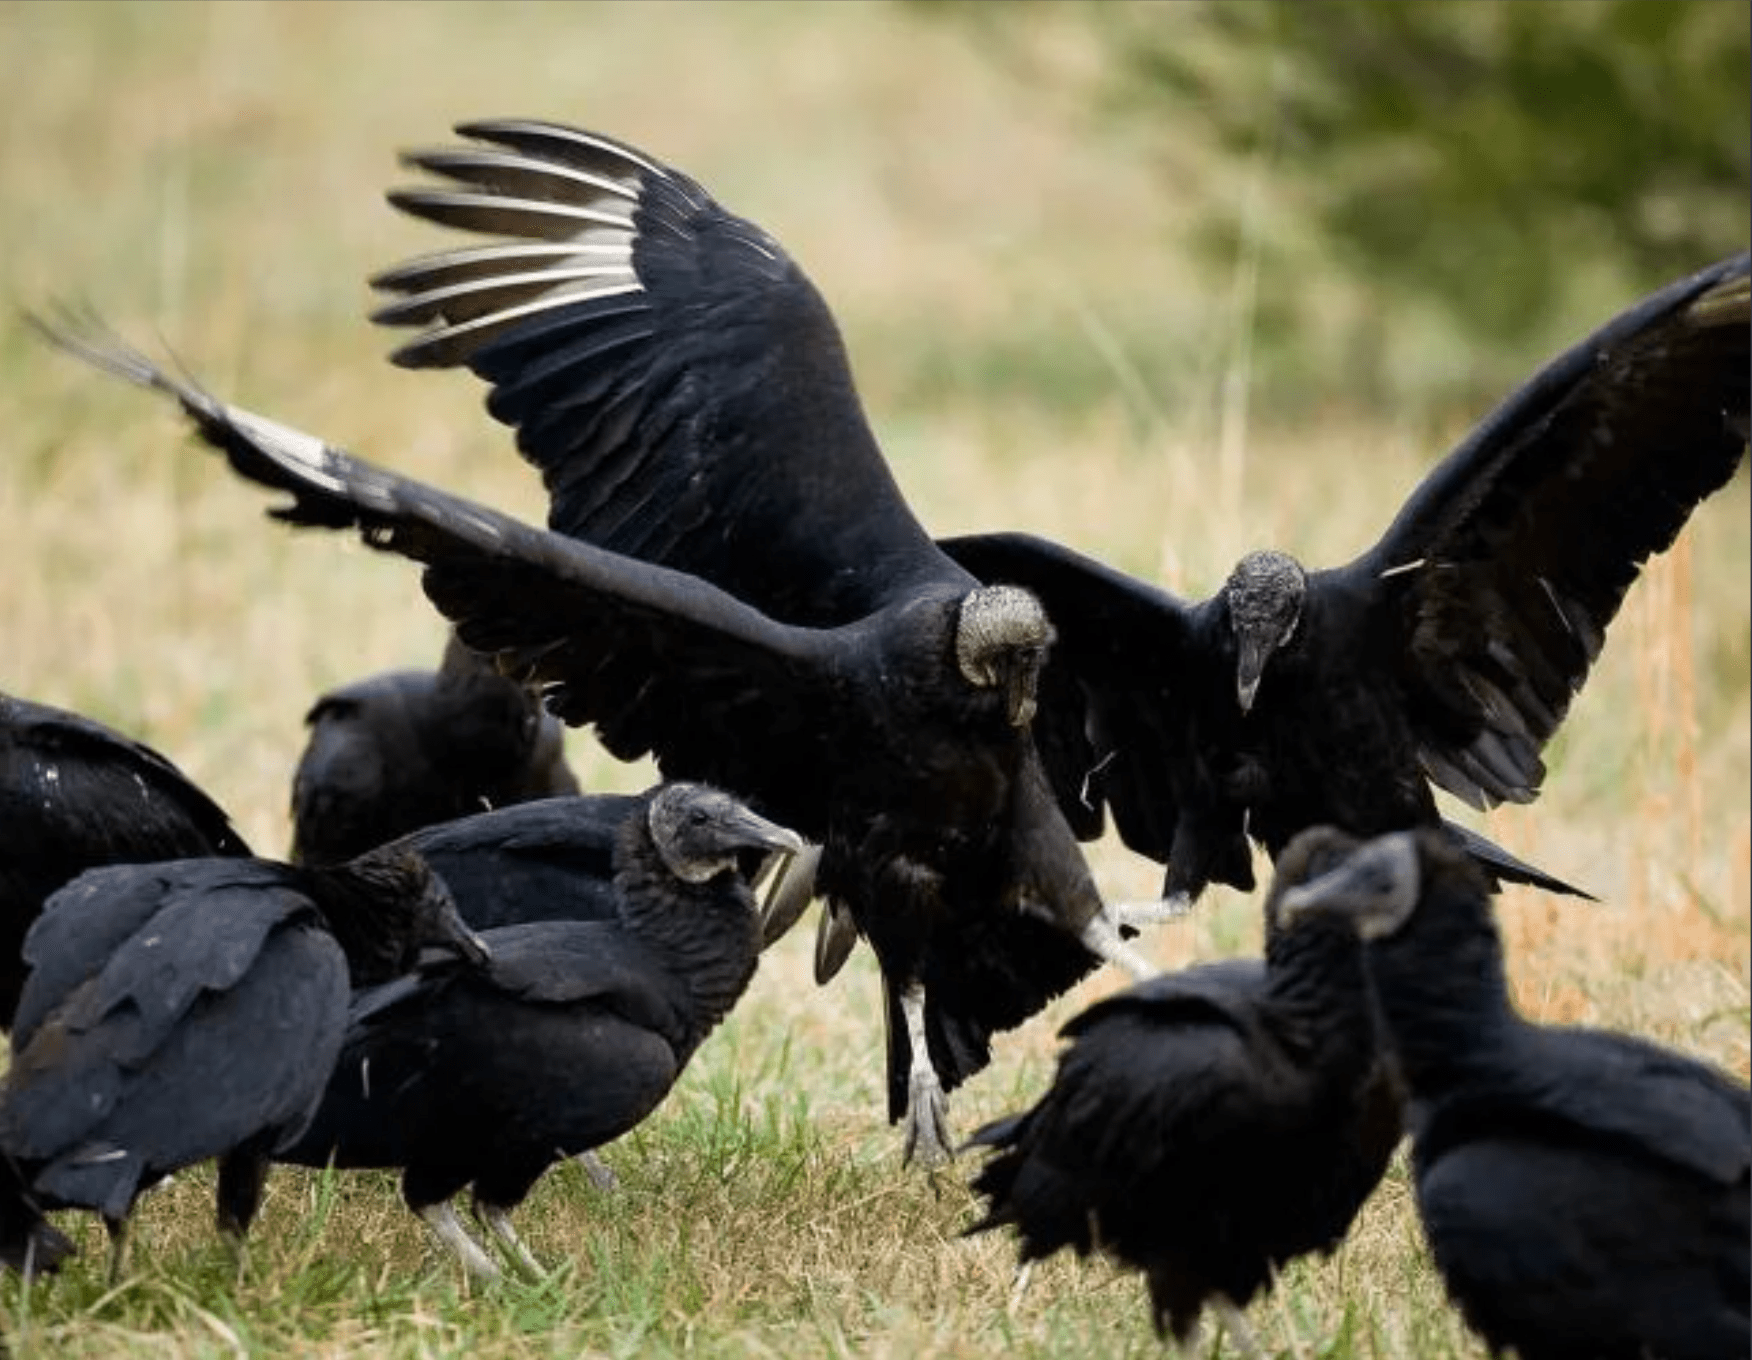 Black vultures are causing human and livestock conflicts around the U.S.